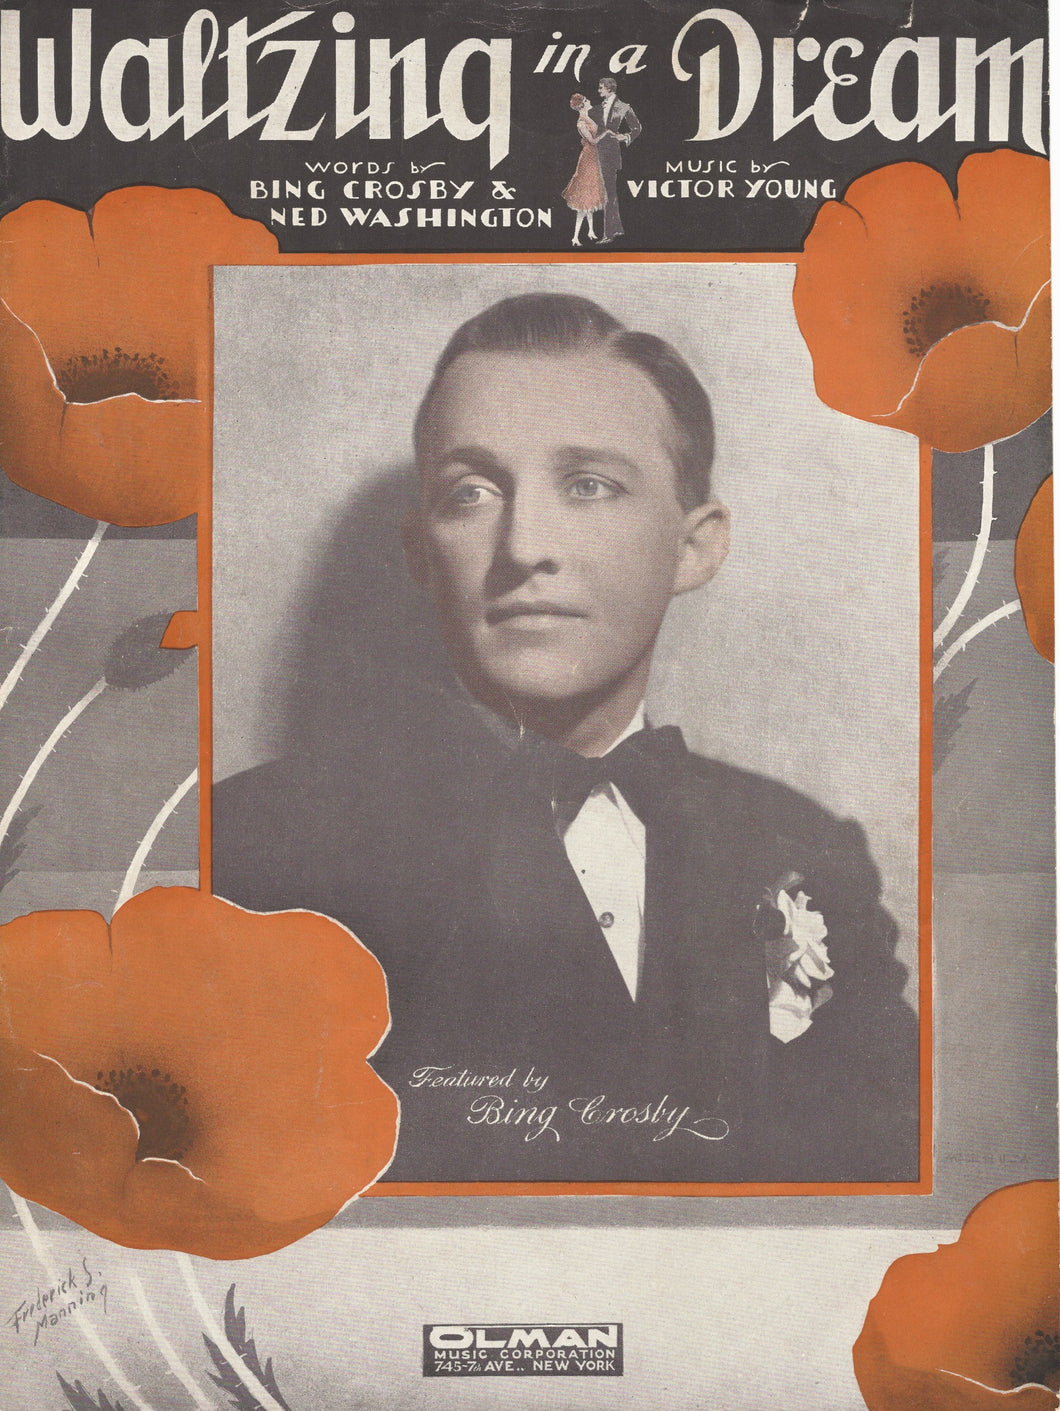 Waltzing in a Dream, words & music by Bing Crosby, Ned Washington, & Victor Young, 1932, Sheet Music